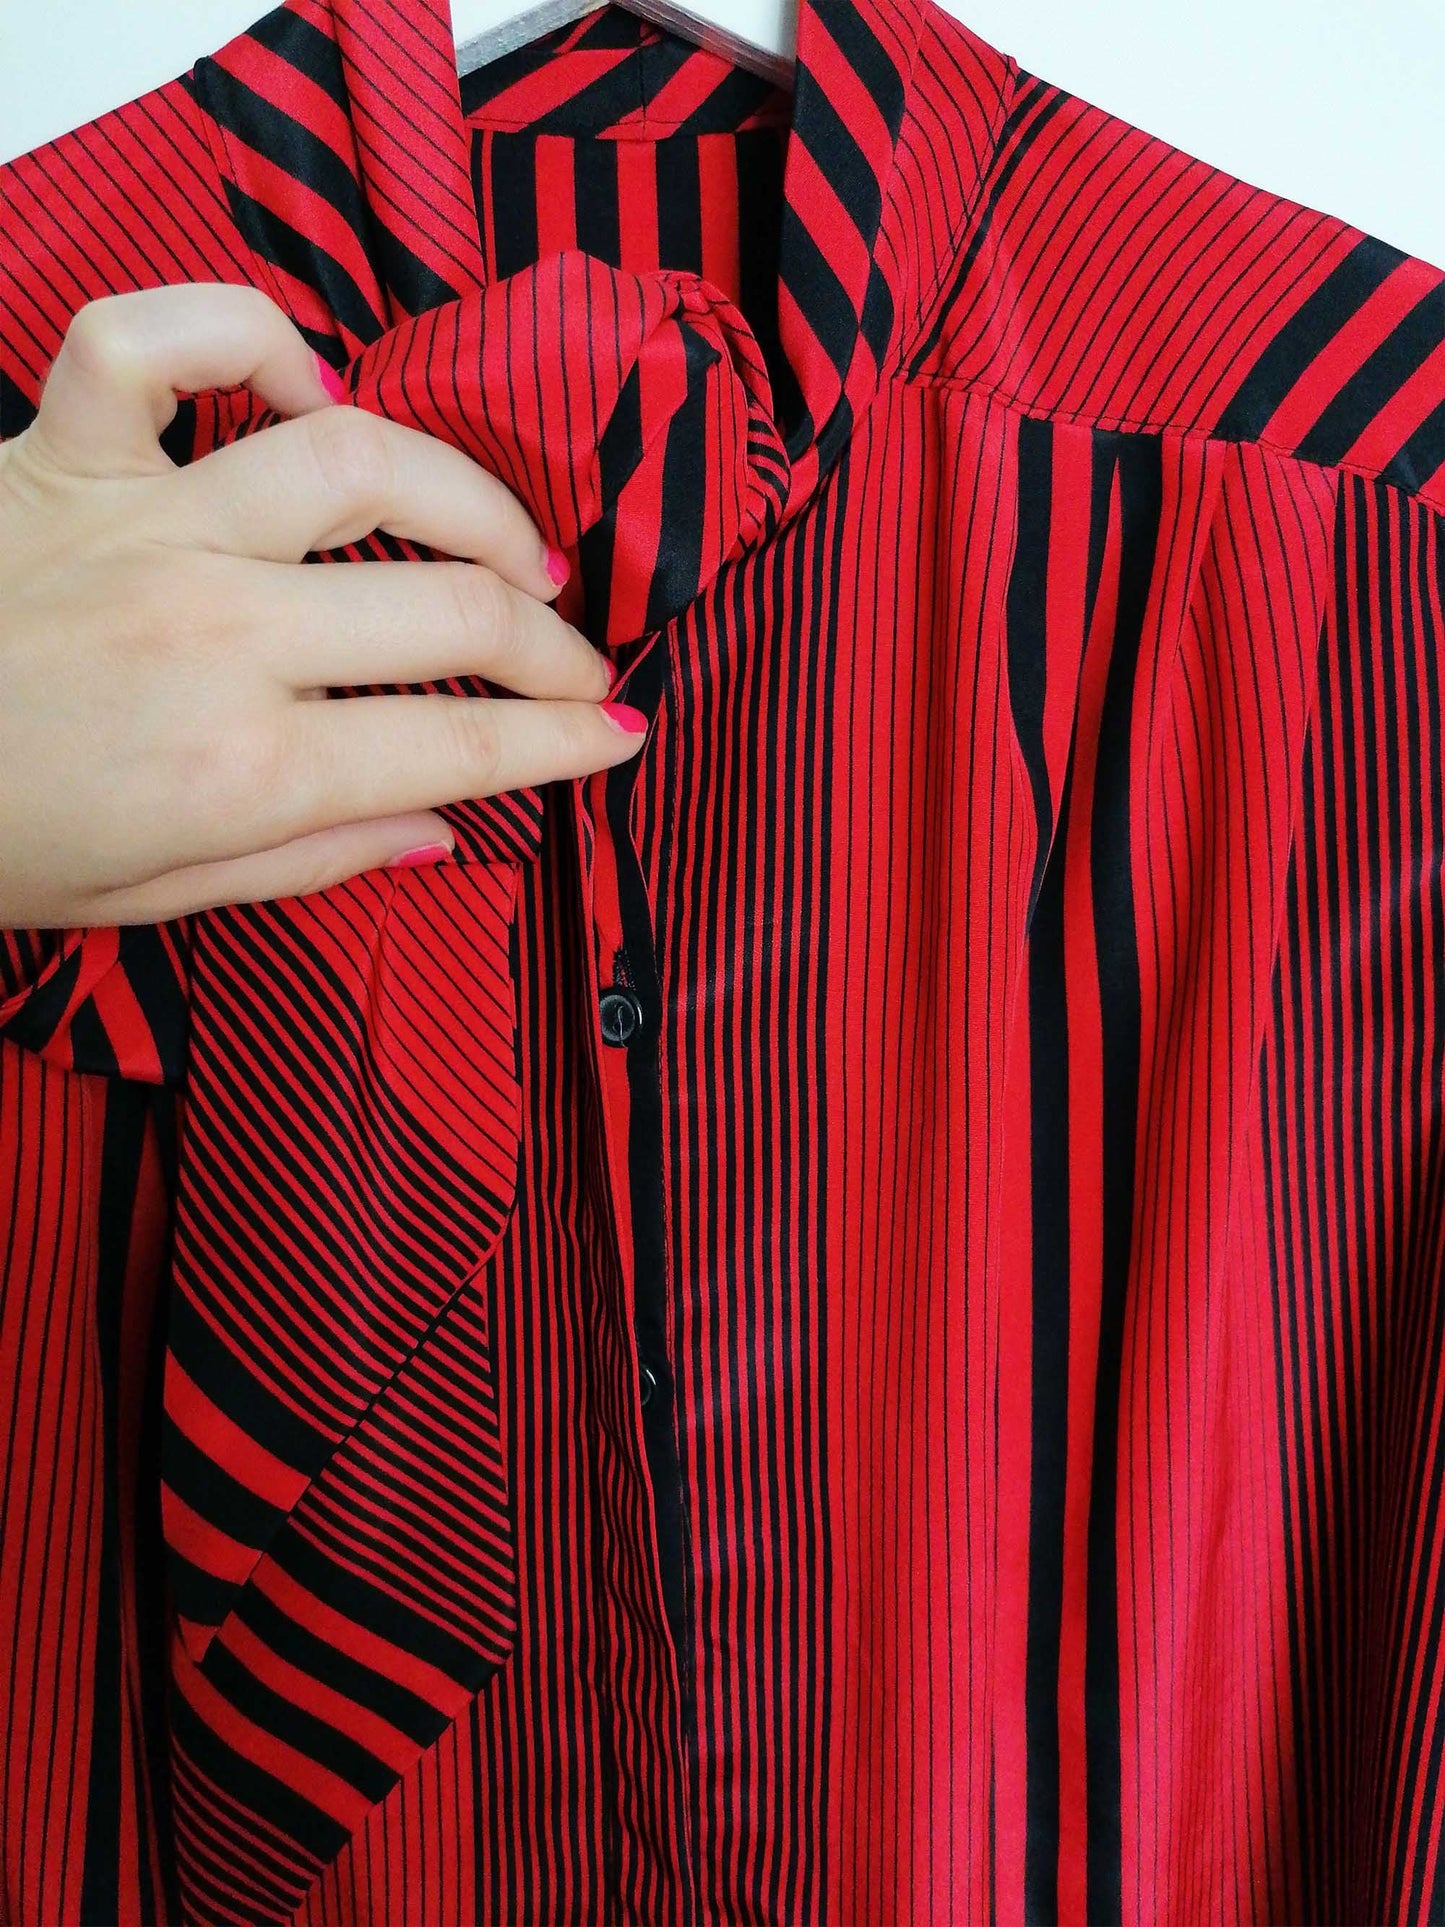 Pussy-bow Blouse Wide Sleeve Red Black Stripes - size S-M